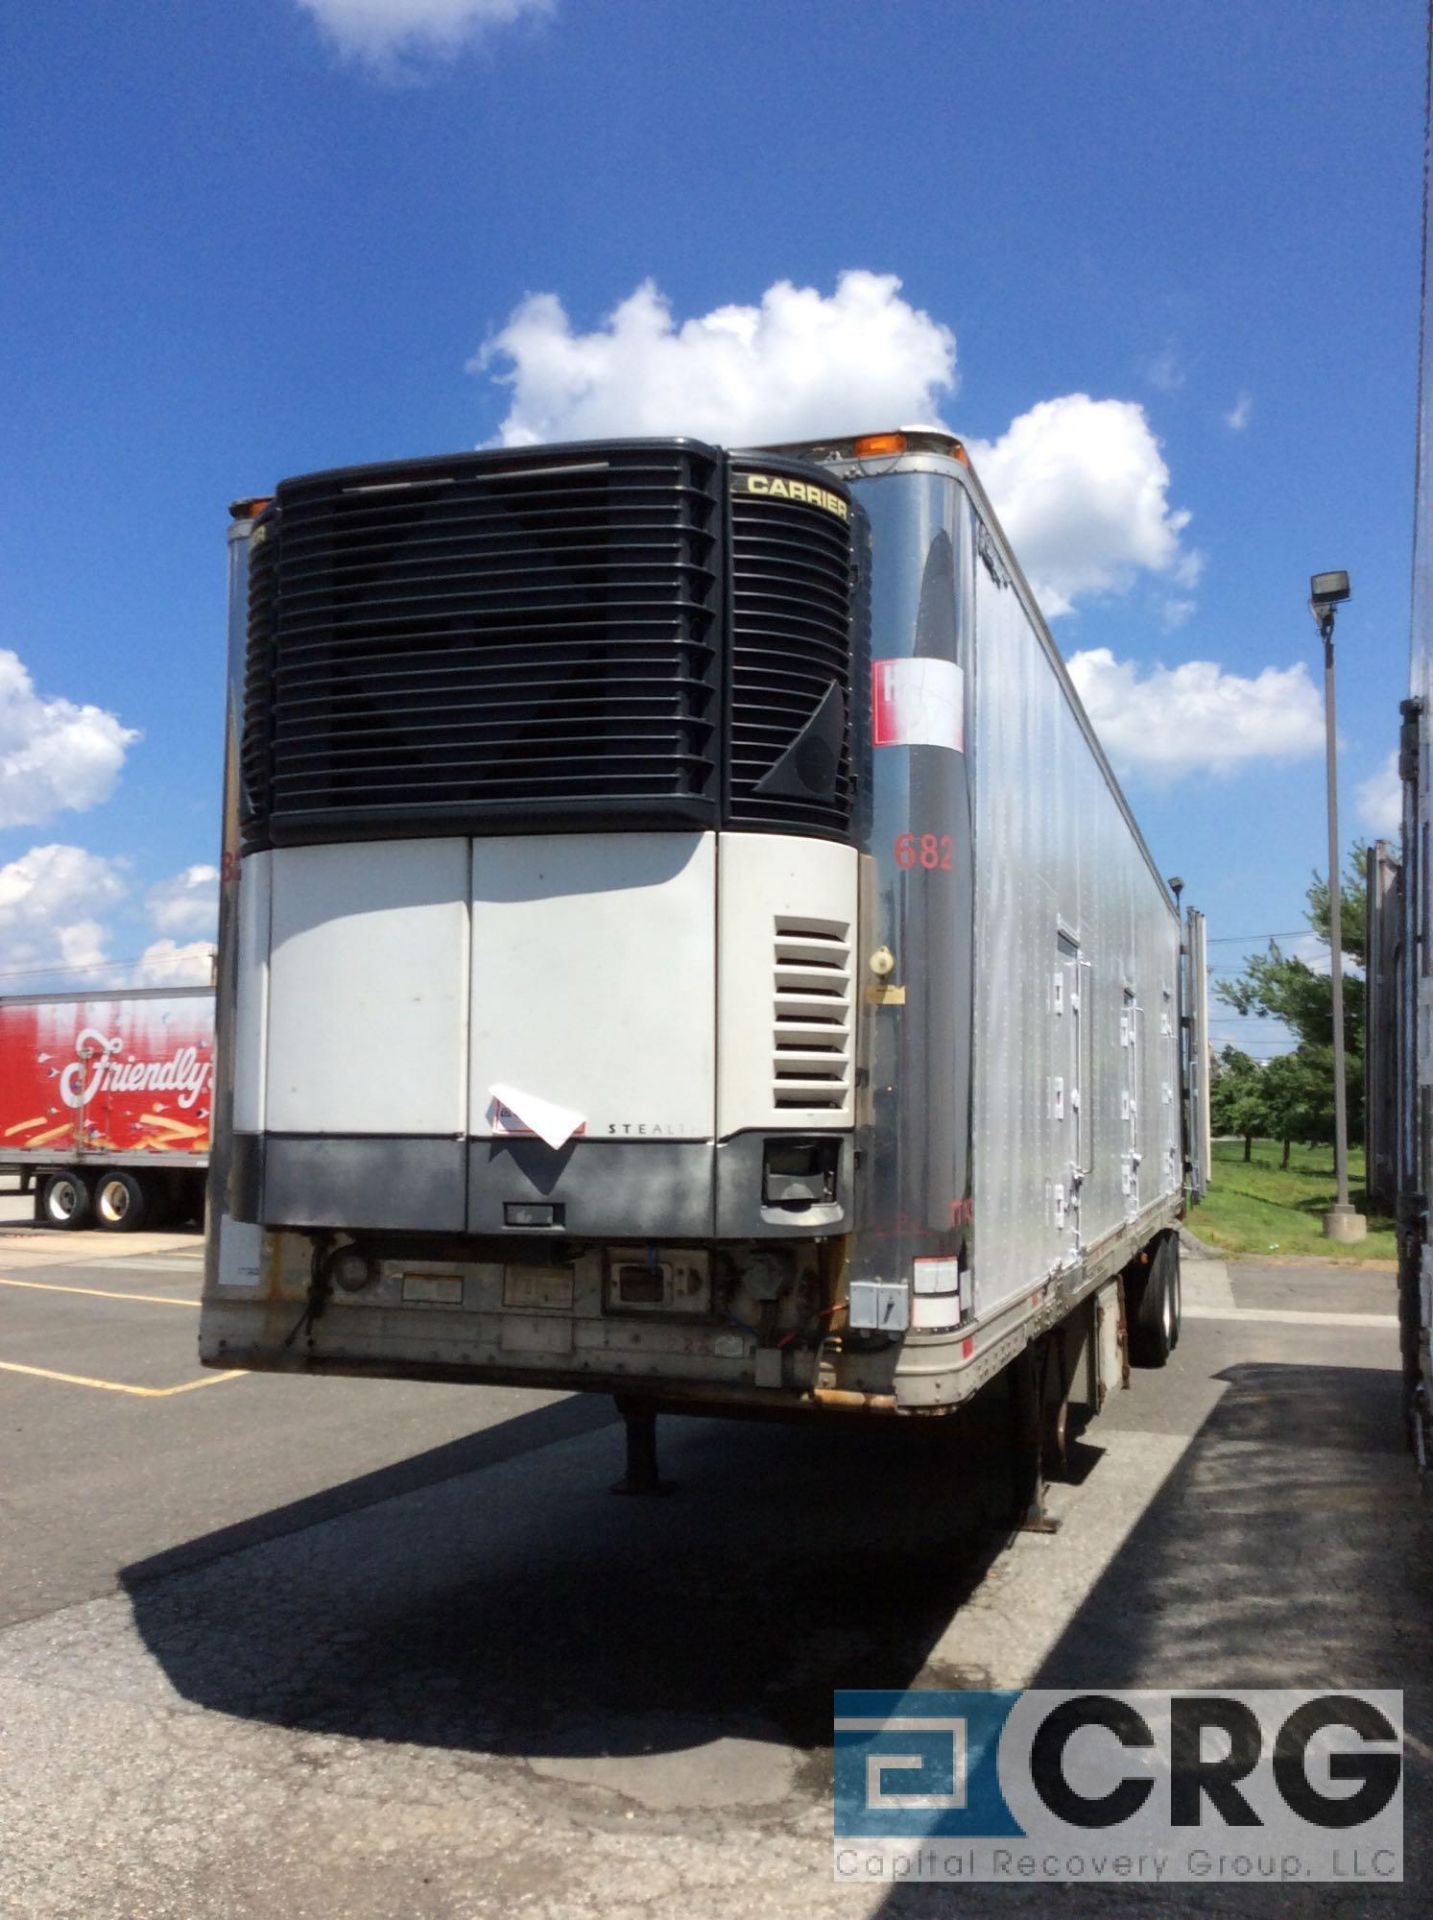 2005 Great Dane Multi Temp Refrigerated Semi Trailer - 43 Long, 96" wide, Carrier Stealth, hours, 6 - Image 2 of 6